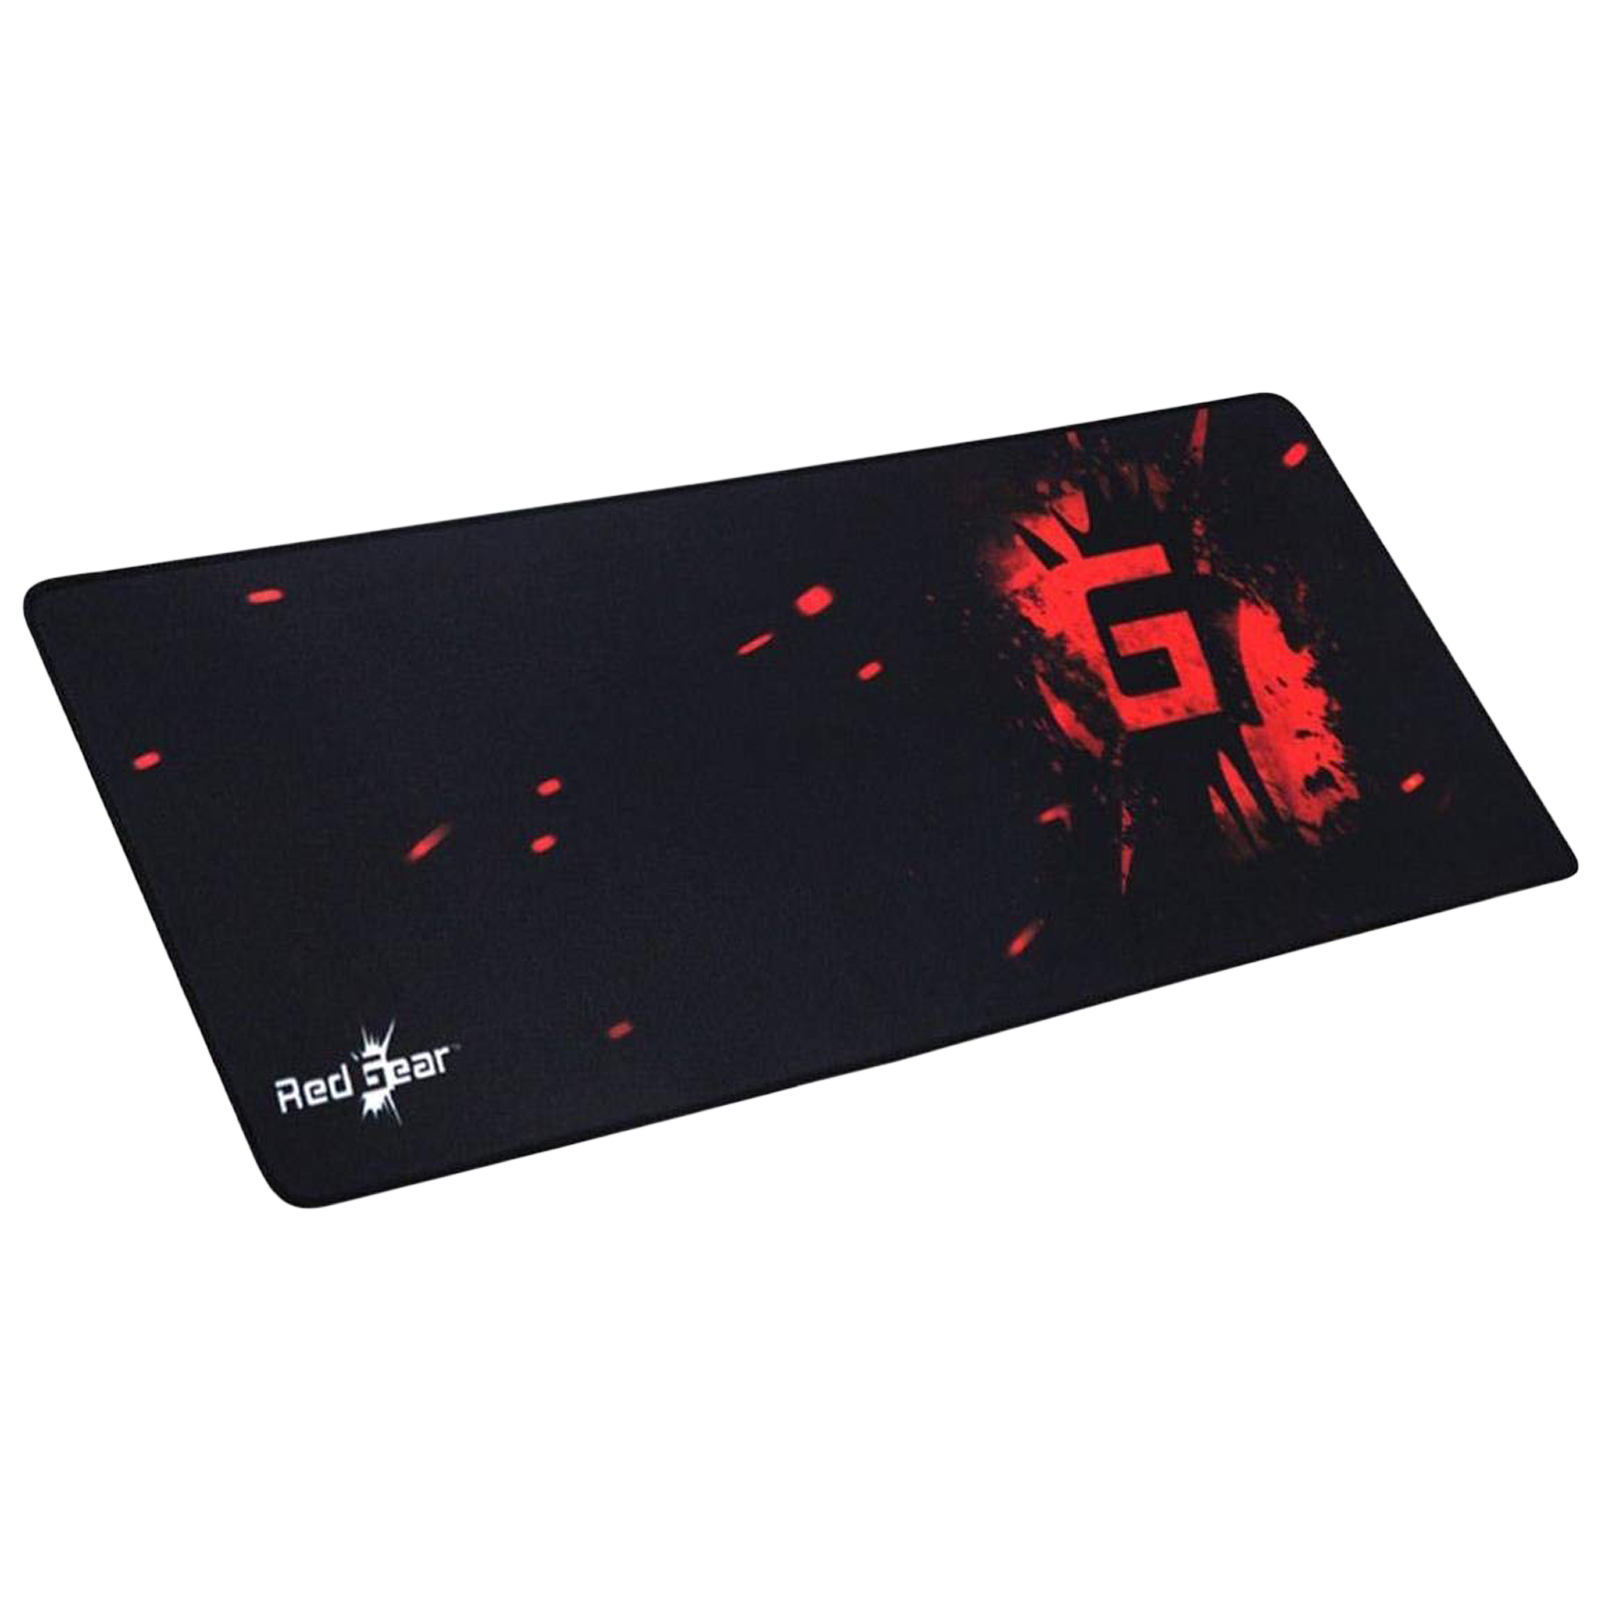 Redgear MP80 Gaming Mouse Pad (Soft And Durable, 8904130838163, Black)_1